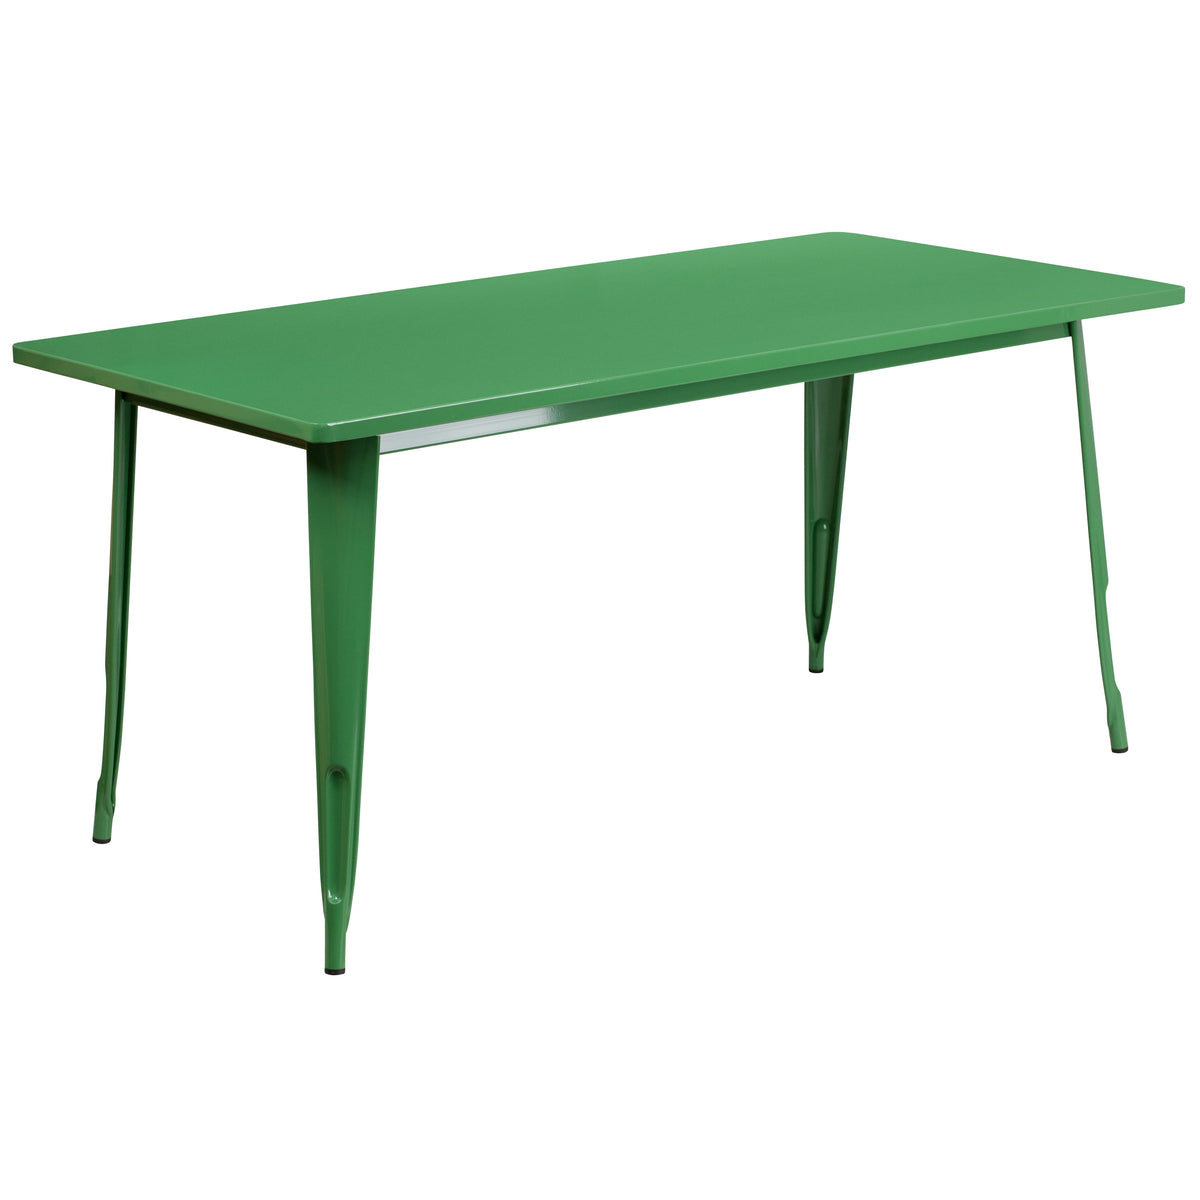 Green |#| 31.5inch x 63inch Rectangular Green Metal Indoor-Outdoor Table Set with 4 Arm Chairs